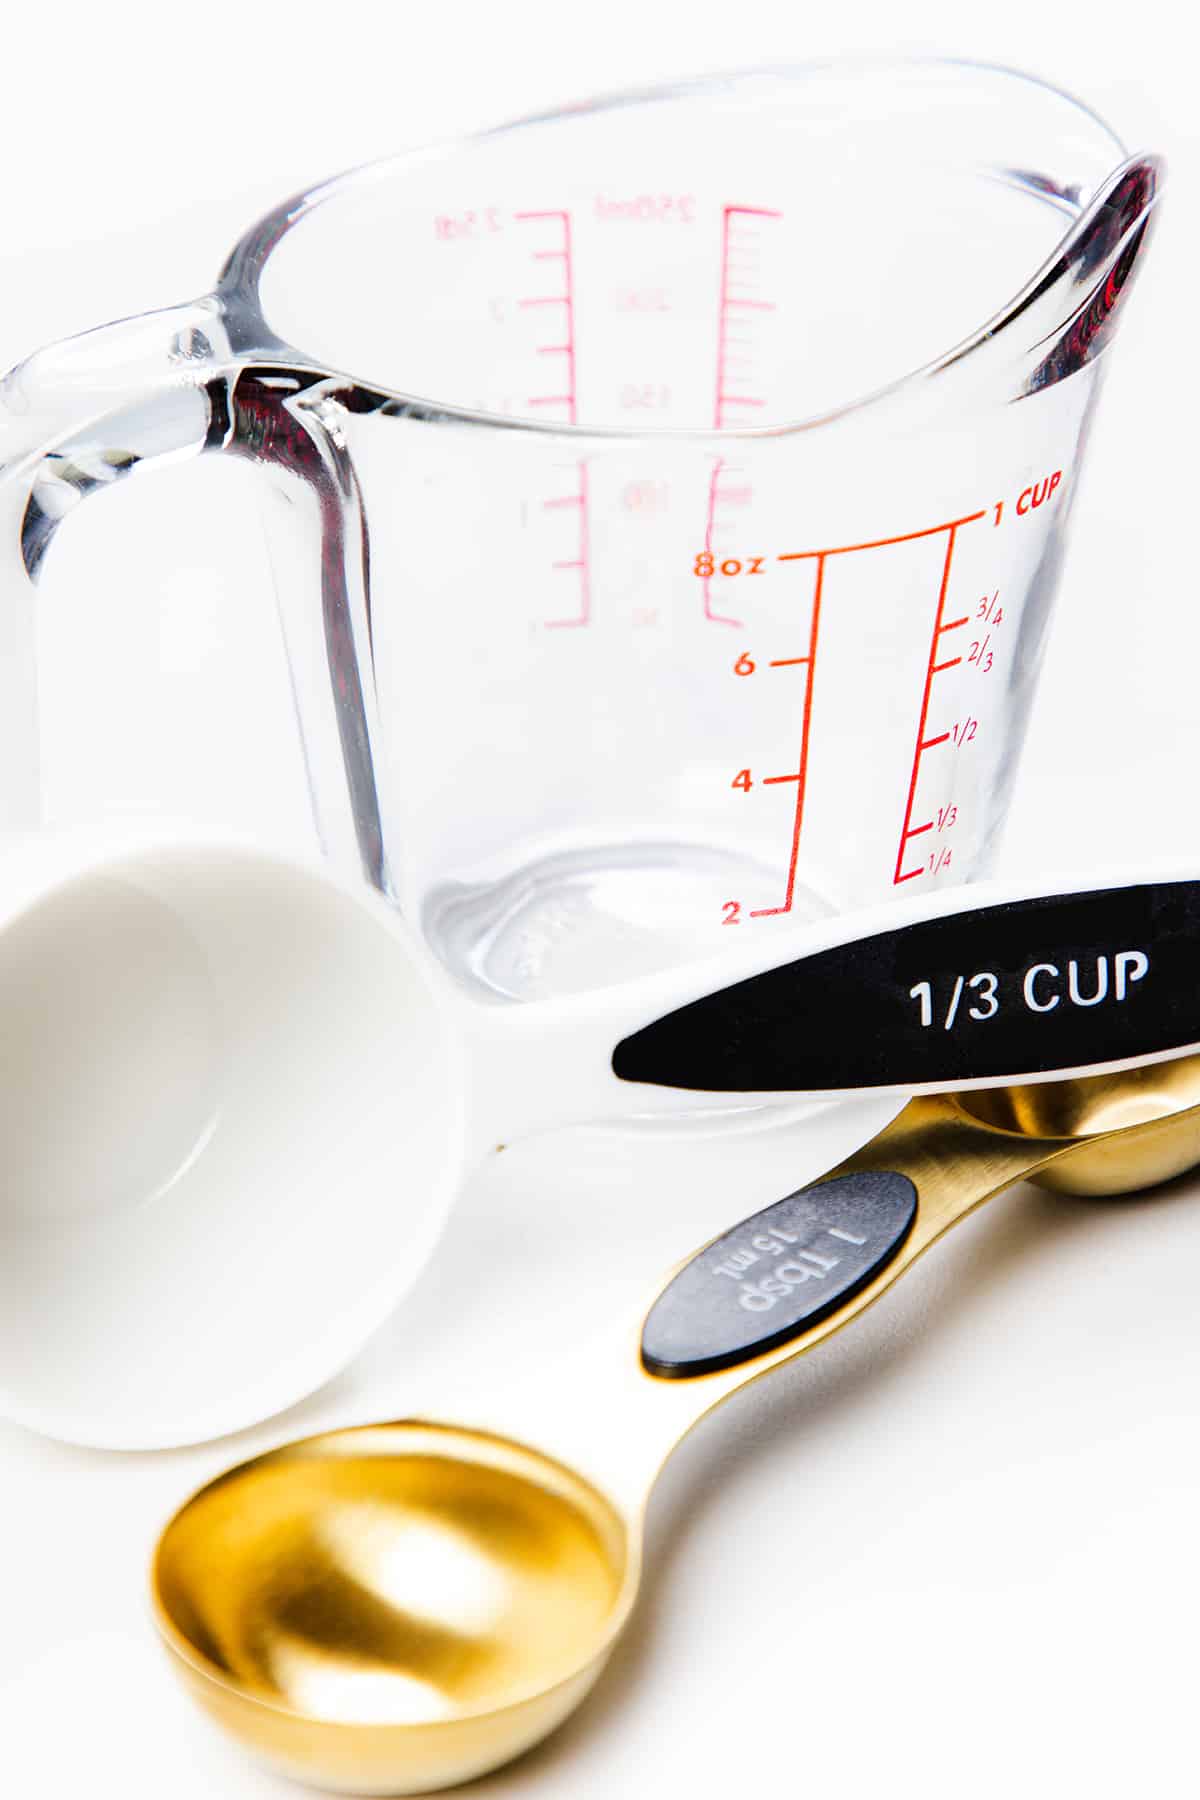 Tablespoons and Cup Sizes Around The World